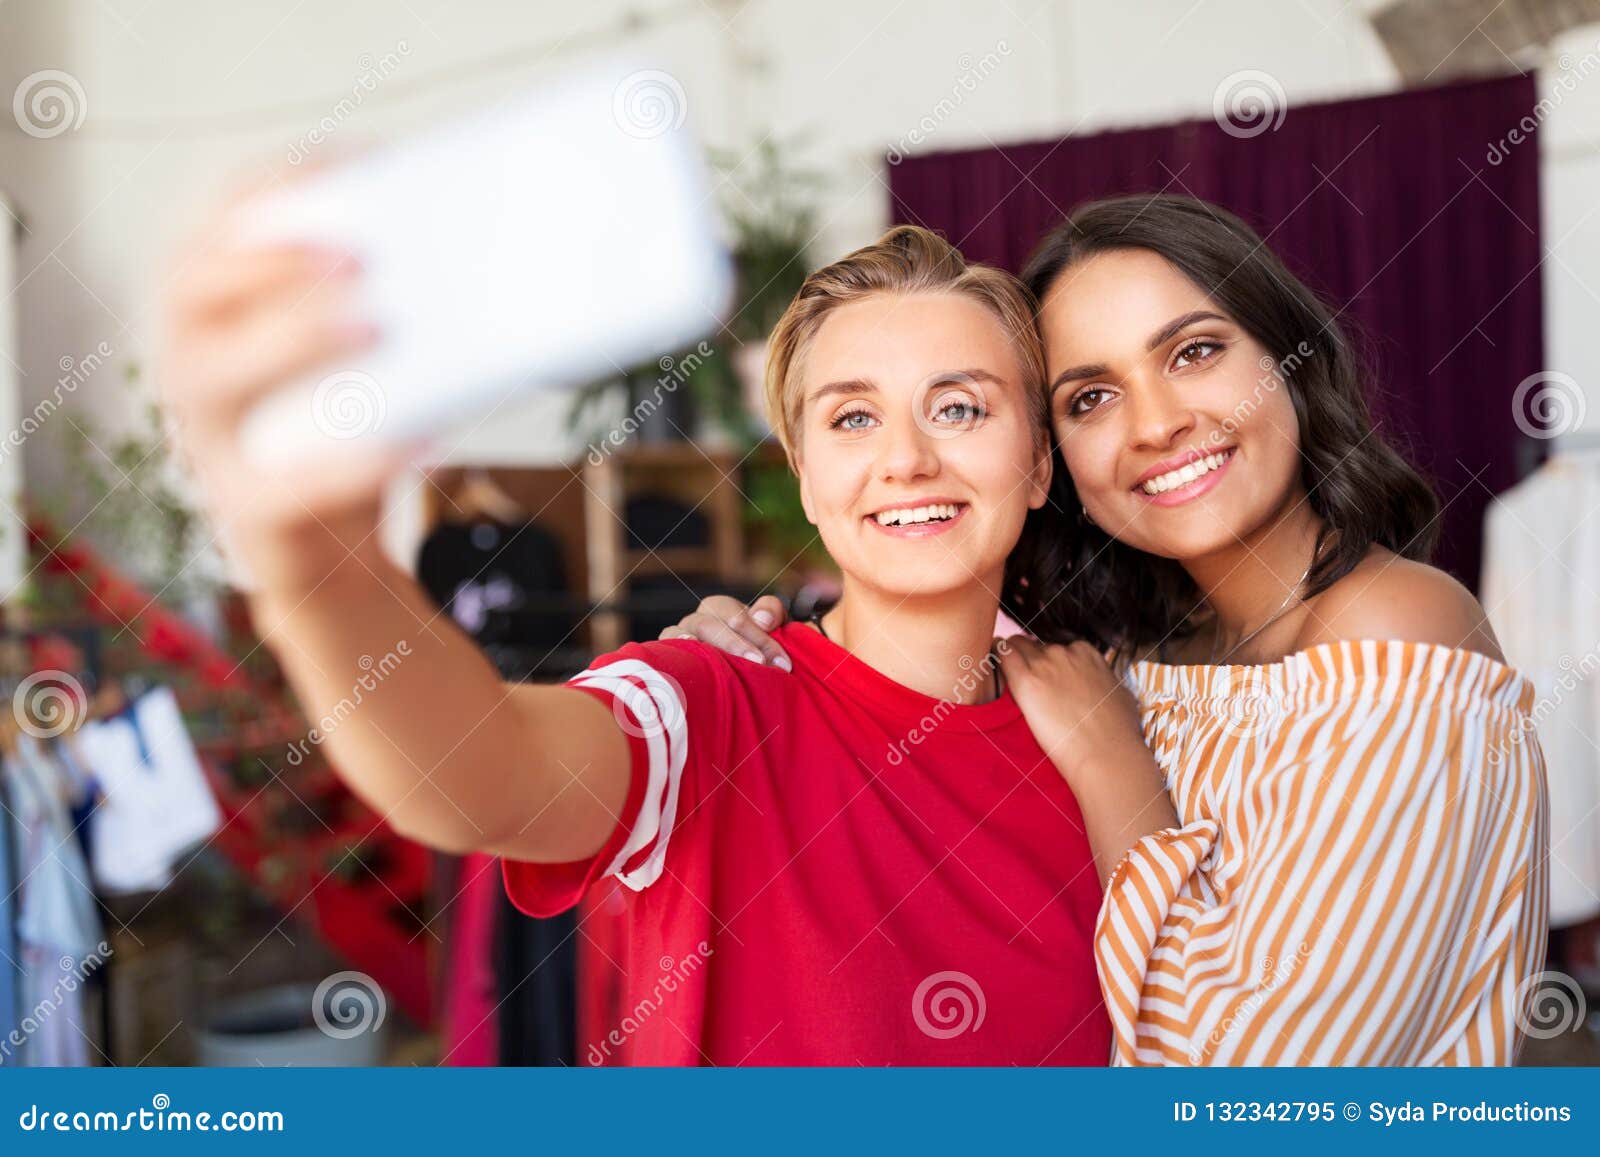 Female Friends Taking Selfie at Clothing Store Stock Image - Image of ...